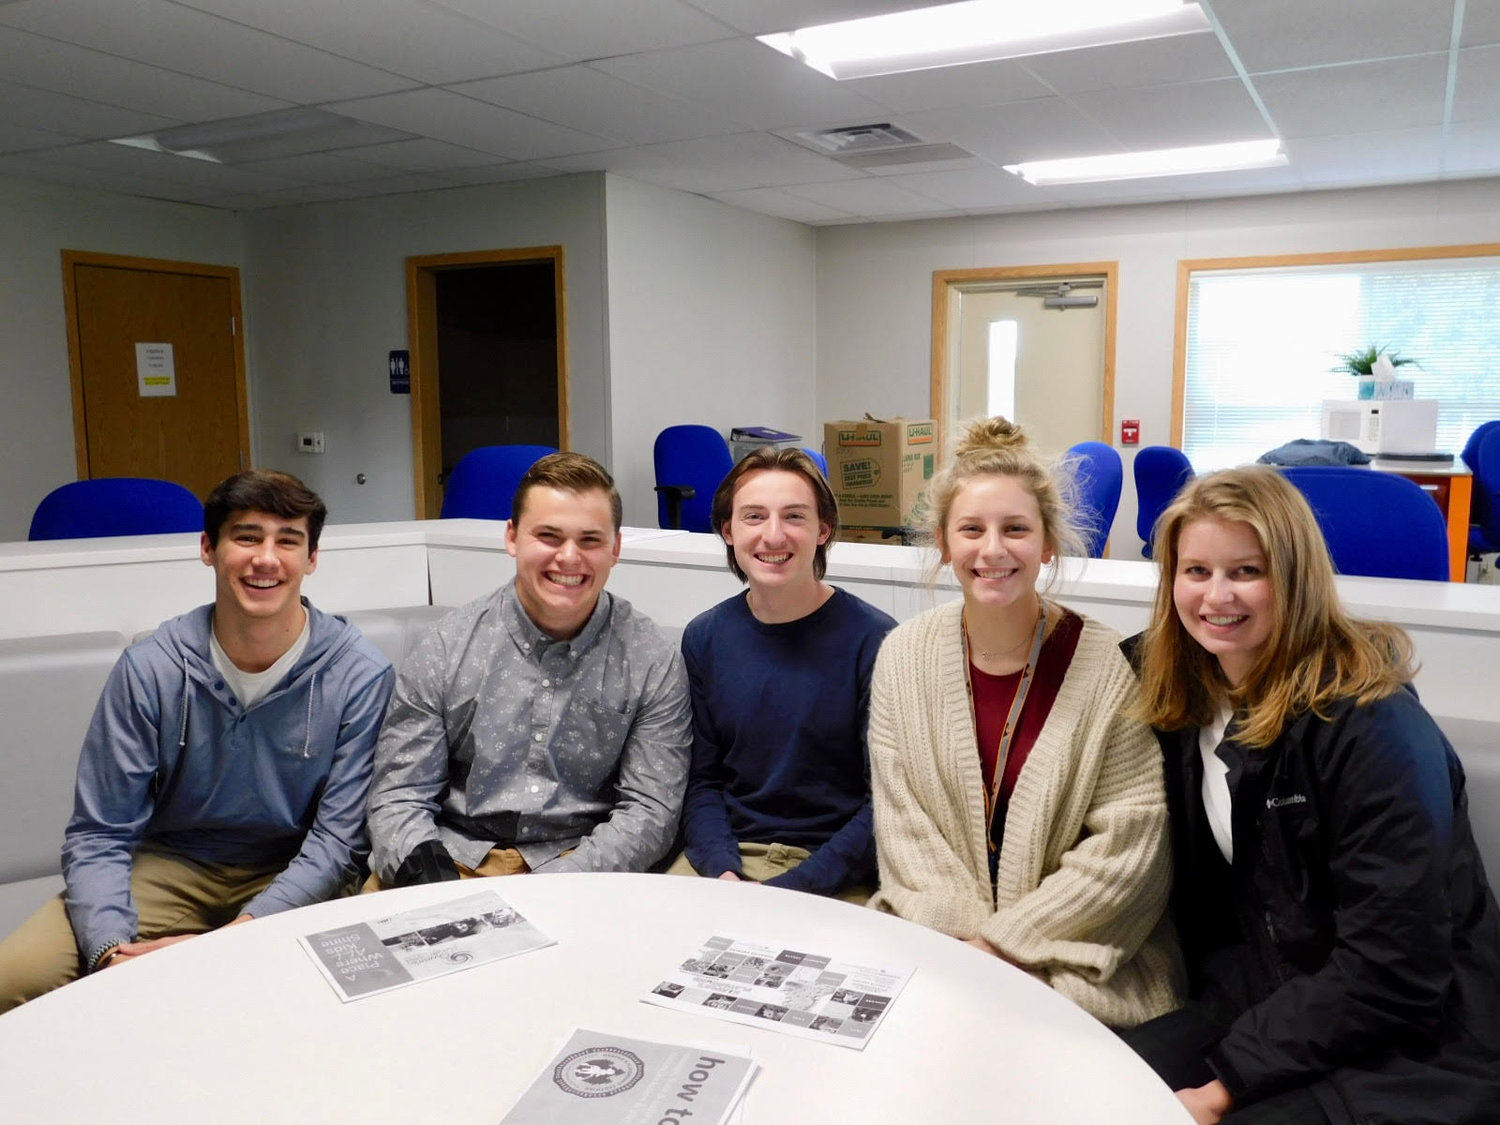 A team of Ridgefield Center for Advanced Professional Studies students created a design for an inclusive playground. Left to right: Nathan Neil, Hunter Abrams, Ethan Barnette, Brooke Weese and Aida Sinks. 